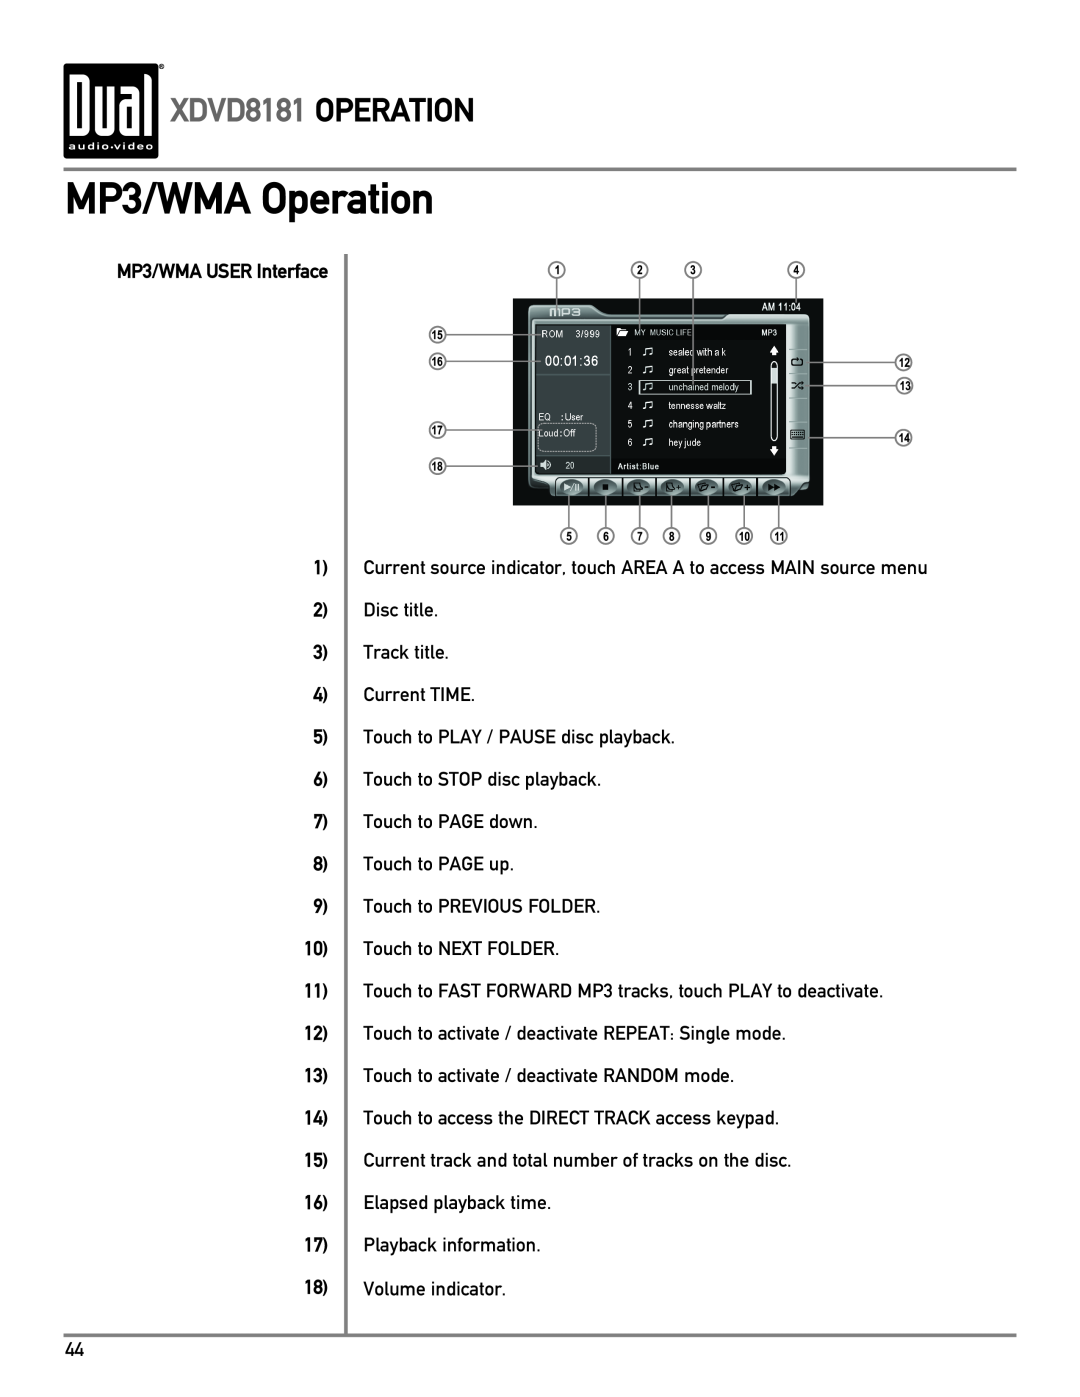 Dual owner manual MP3/WMA Operation, XDVD8181 OPERATION, MP3/WMA USER Interface 1 2 3 4 5 6 7 8, 13 14 